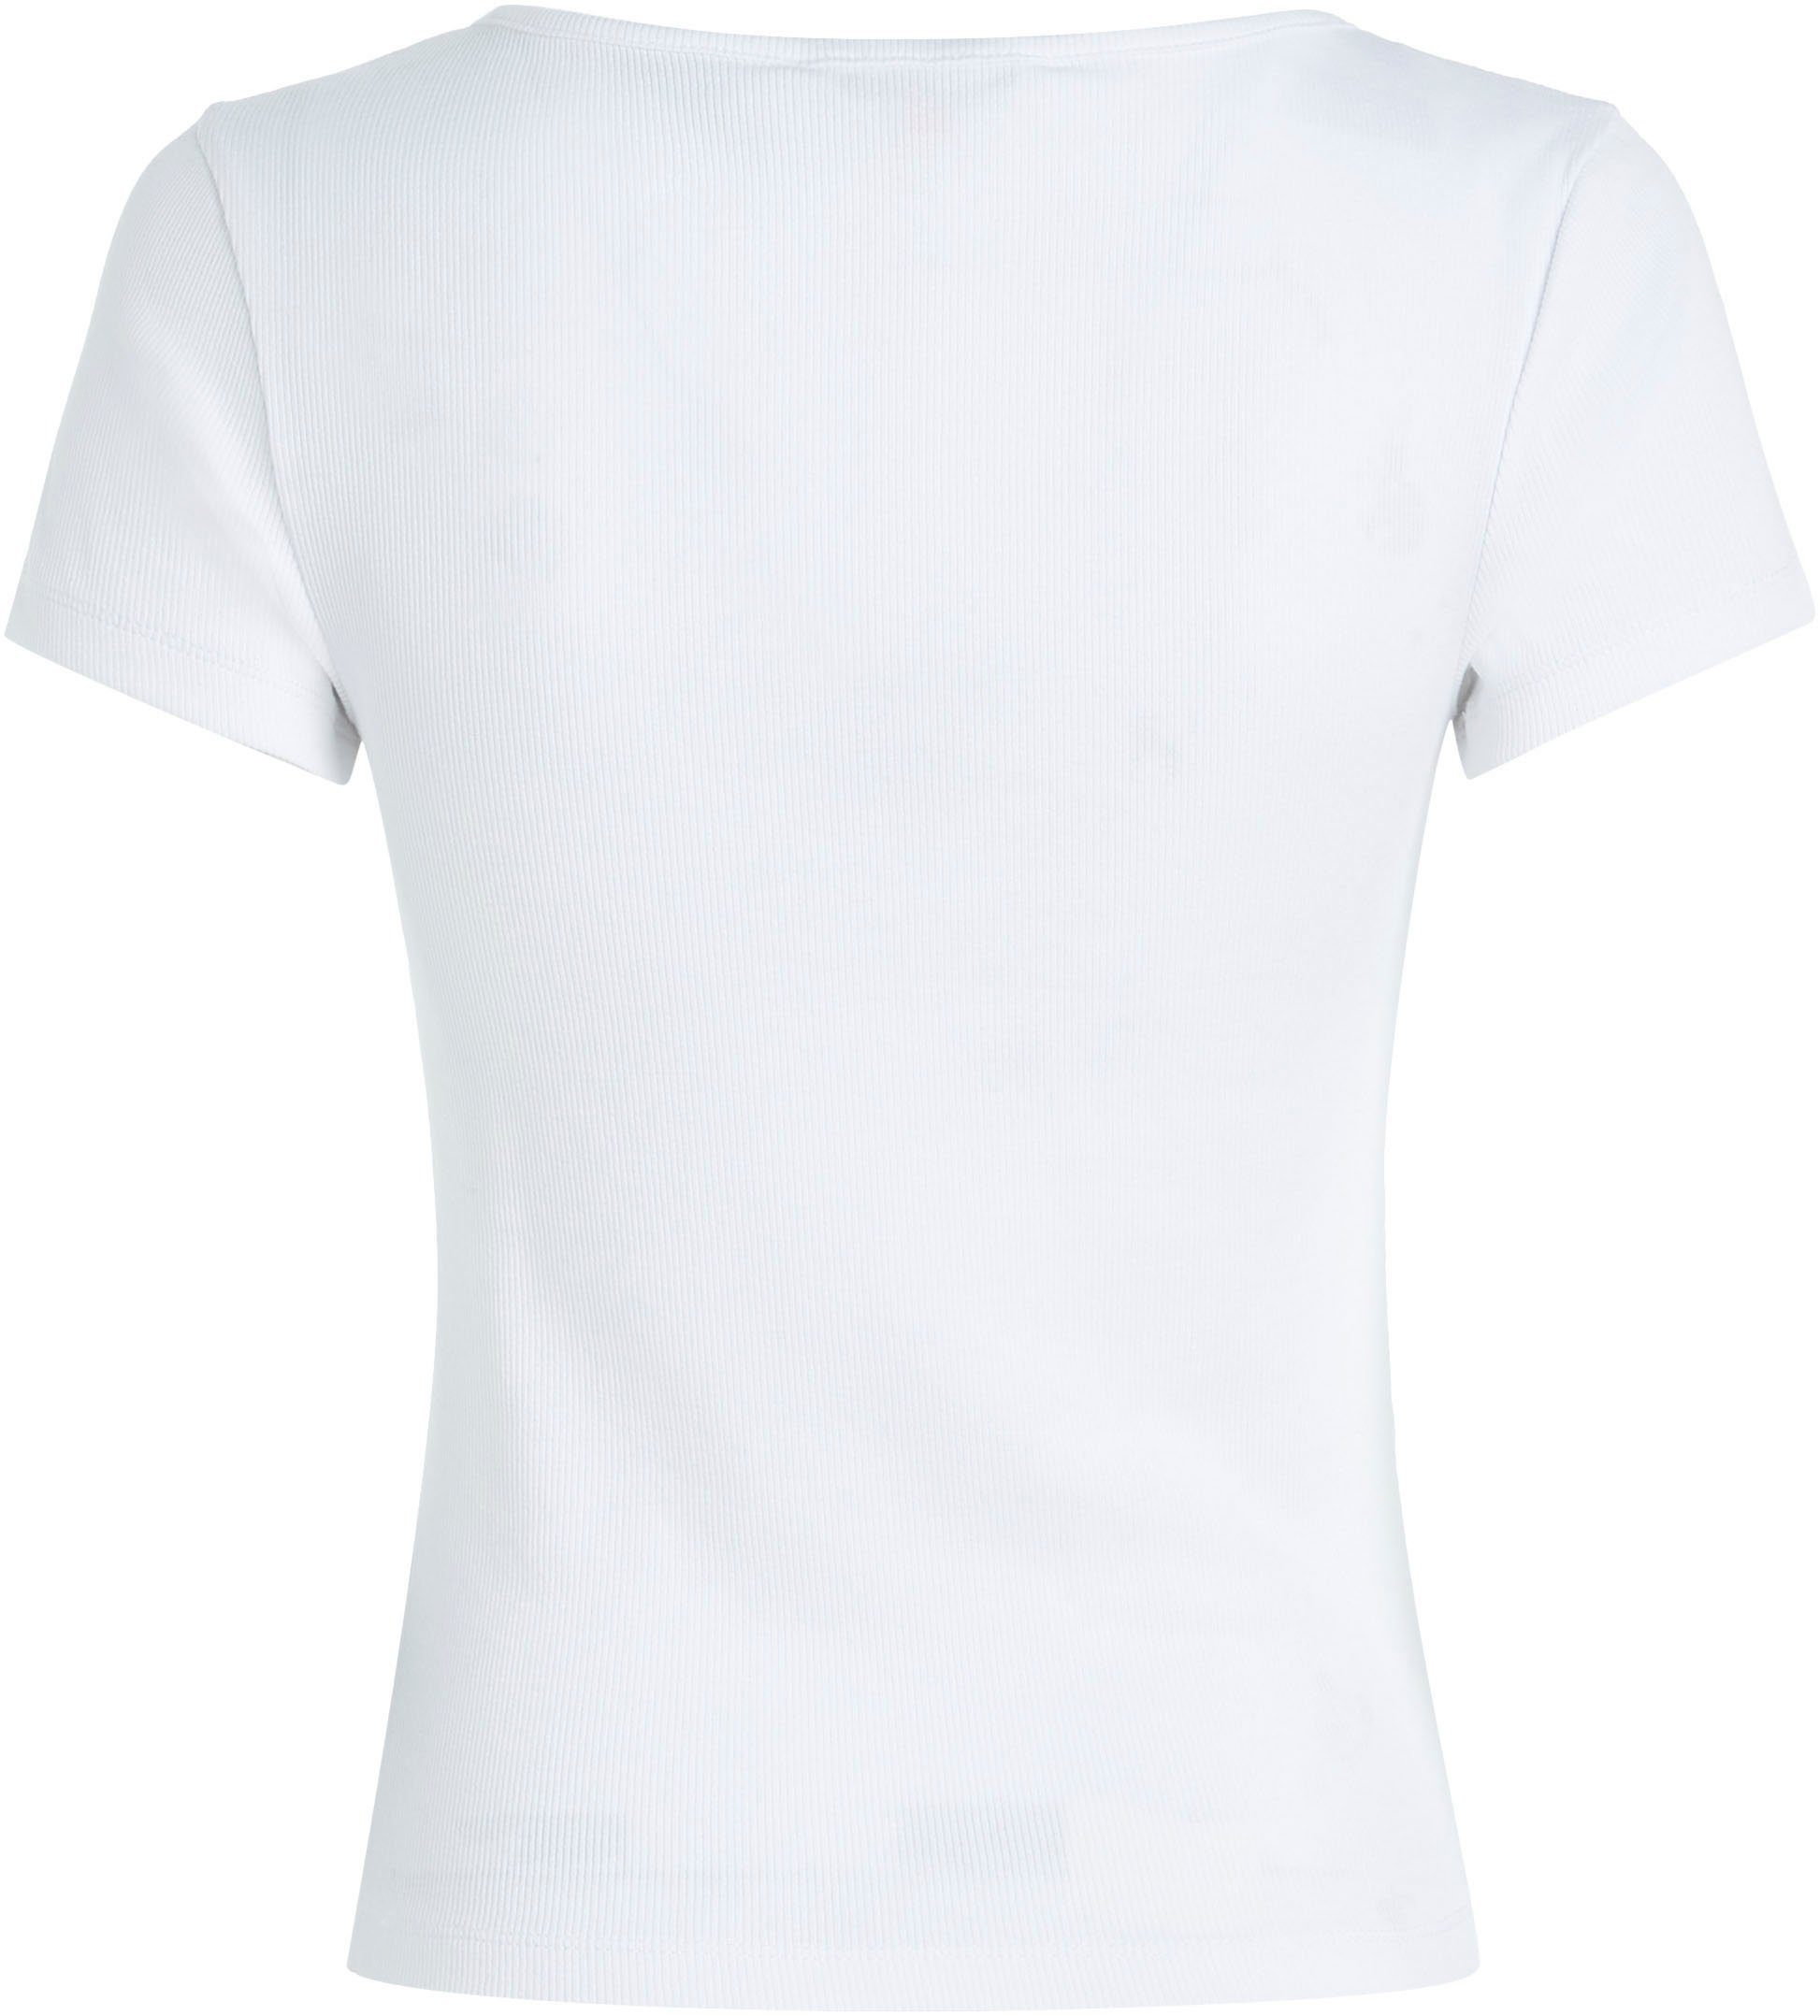 Tommy Jeans T-Shirt C-NECK mit BBY Jeans RIB Logostickerei BUTTON Tommy TJW White